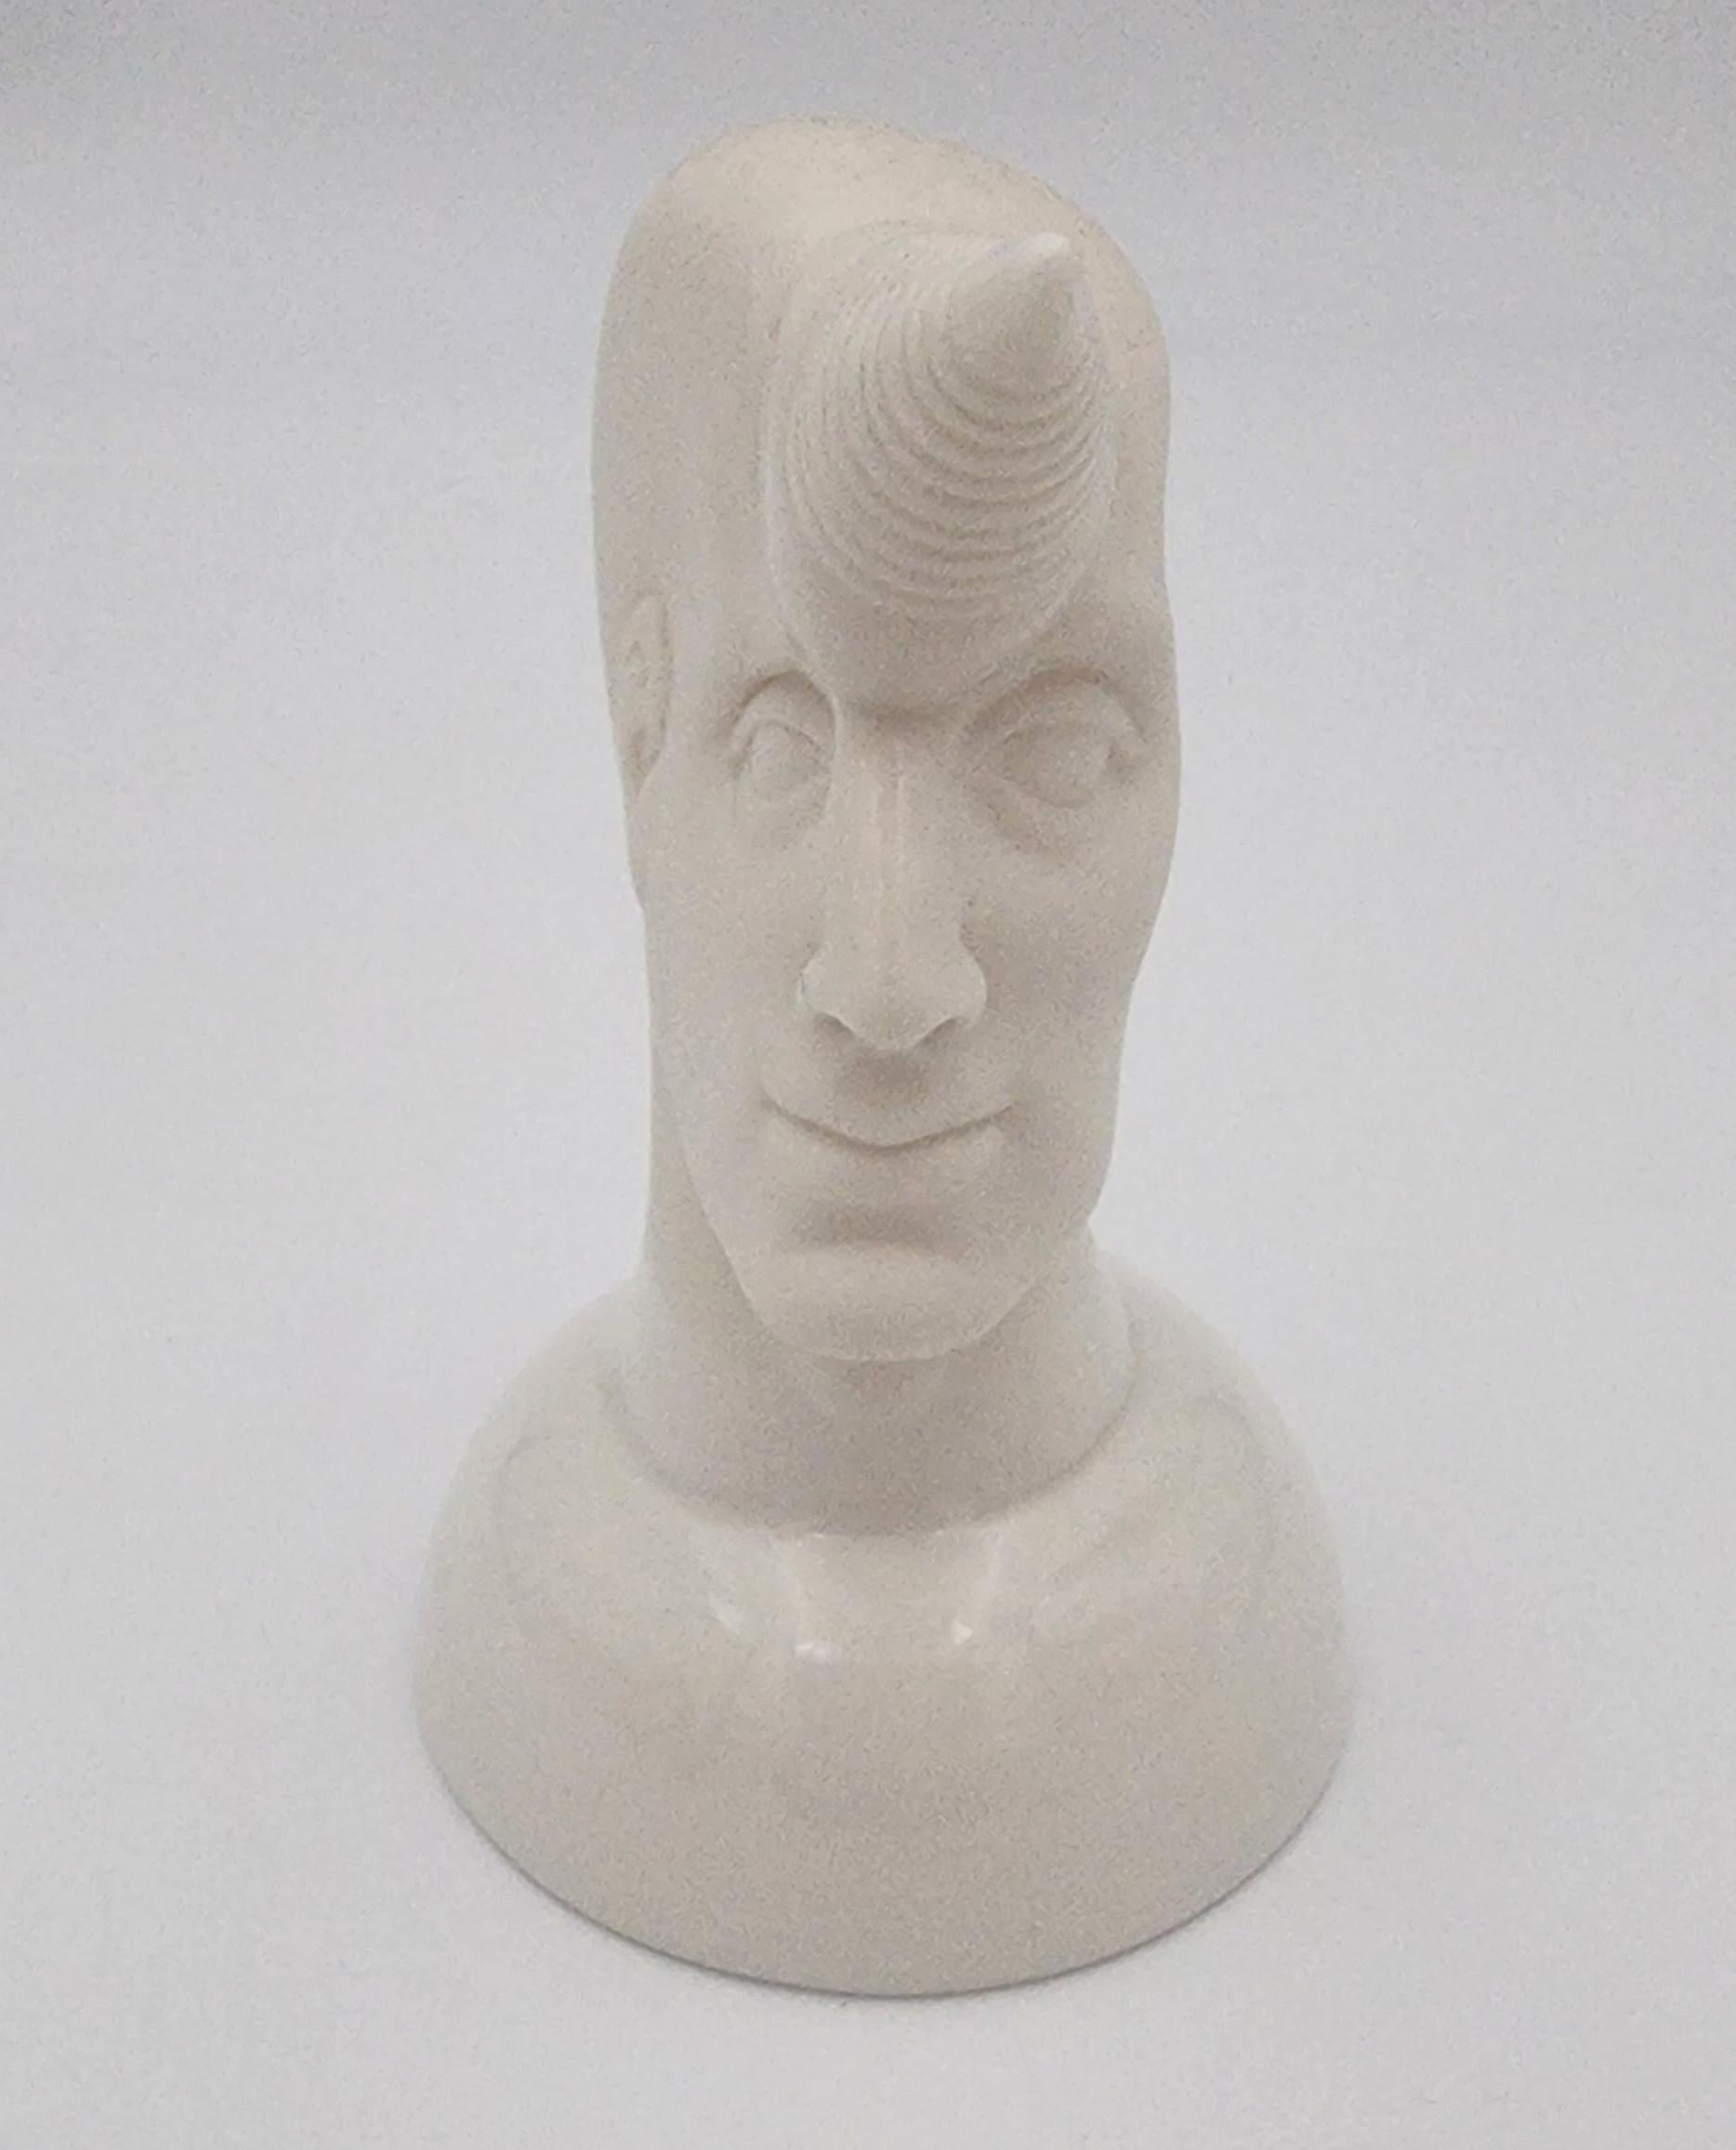 Ilona Romule
Male Head with Stylized Horn (Porcelain, Latvia, Sculpture, Smooth Texture, Translucent, White Gold)
Porcelain, Glaze
Year: 2000s
Size: 4.75x4x3in
COA provided
Ref.: 24802-1735

Tags: Porcelain, Latvia, Sculpture, Smooth Texture,